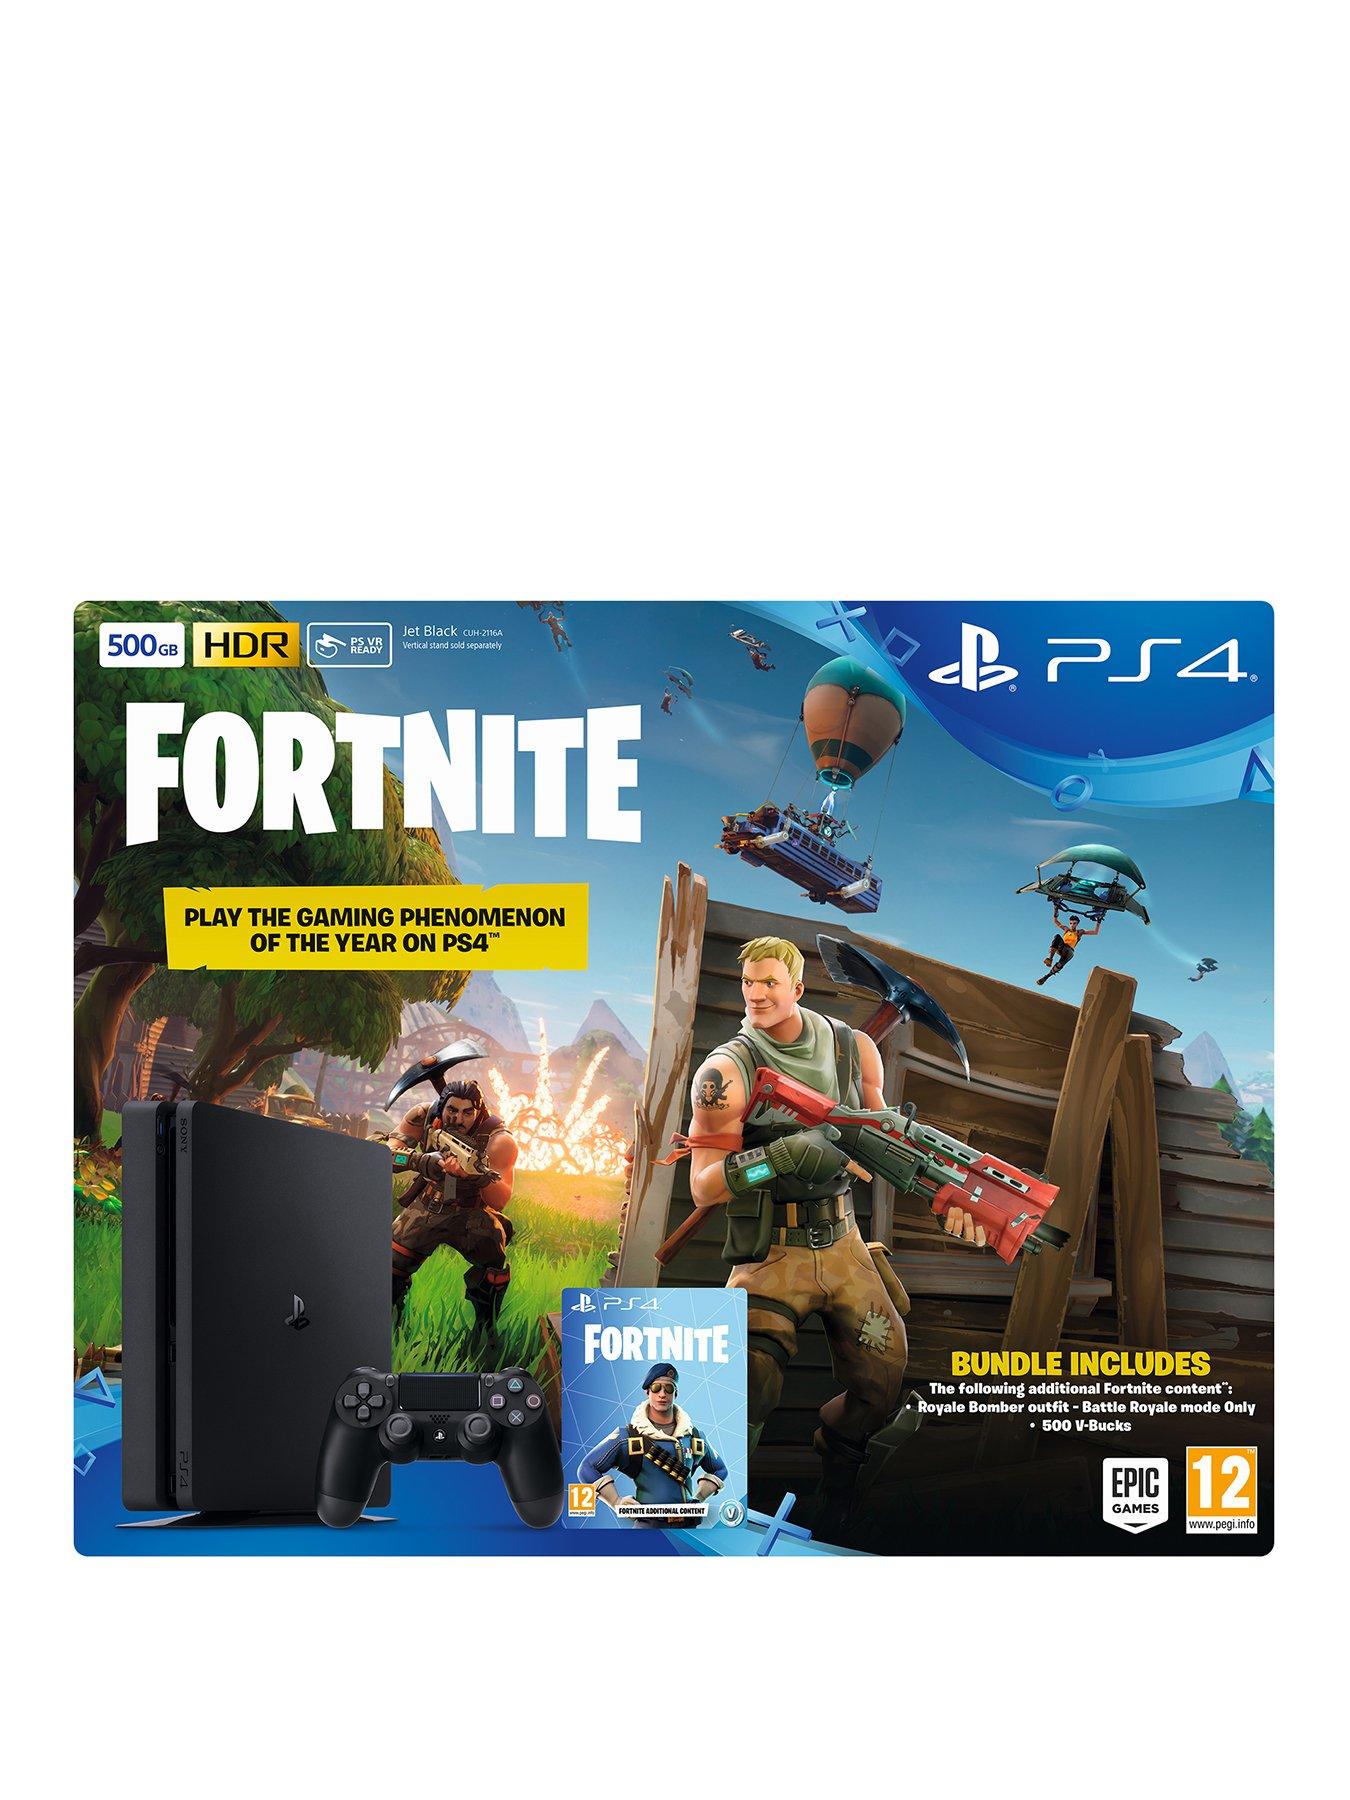 Playstation 4 500gb Black Console With Fortnite Royal Bomber Skin - playstation 4 500gb black console with fortnite royal bomber skin and 500 v bucks plus optional extras